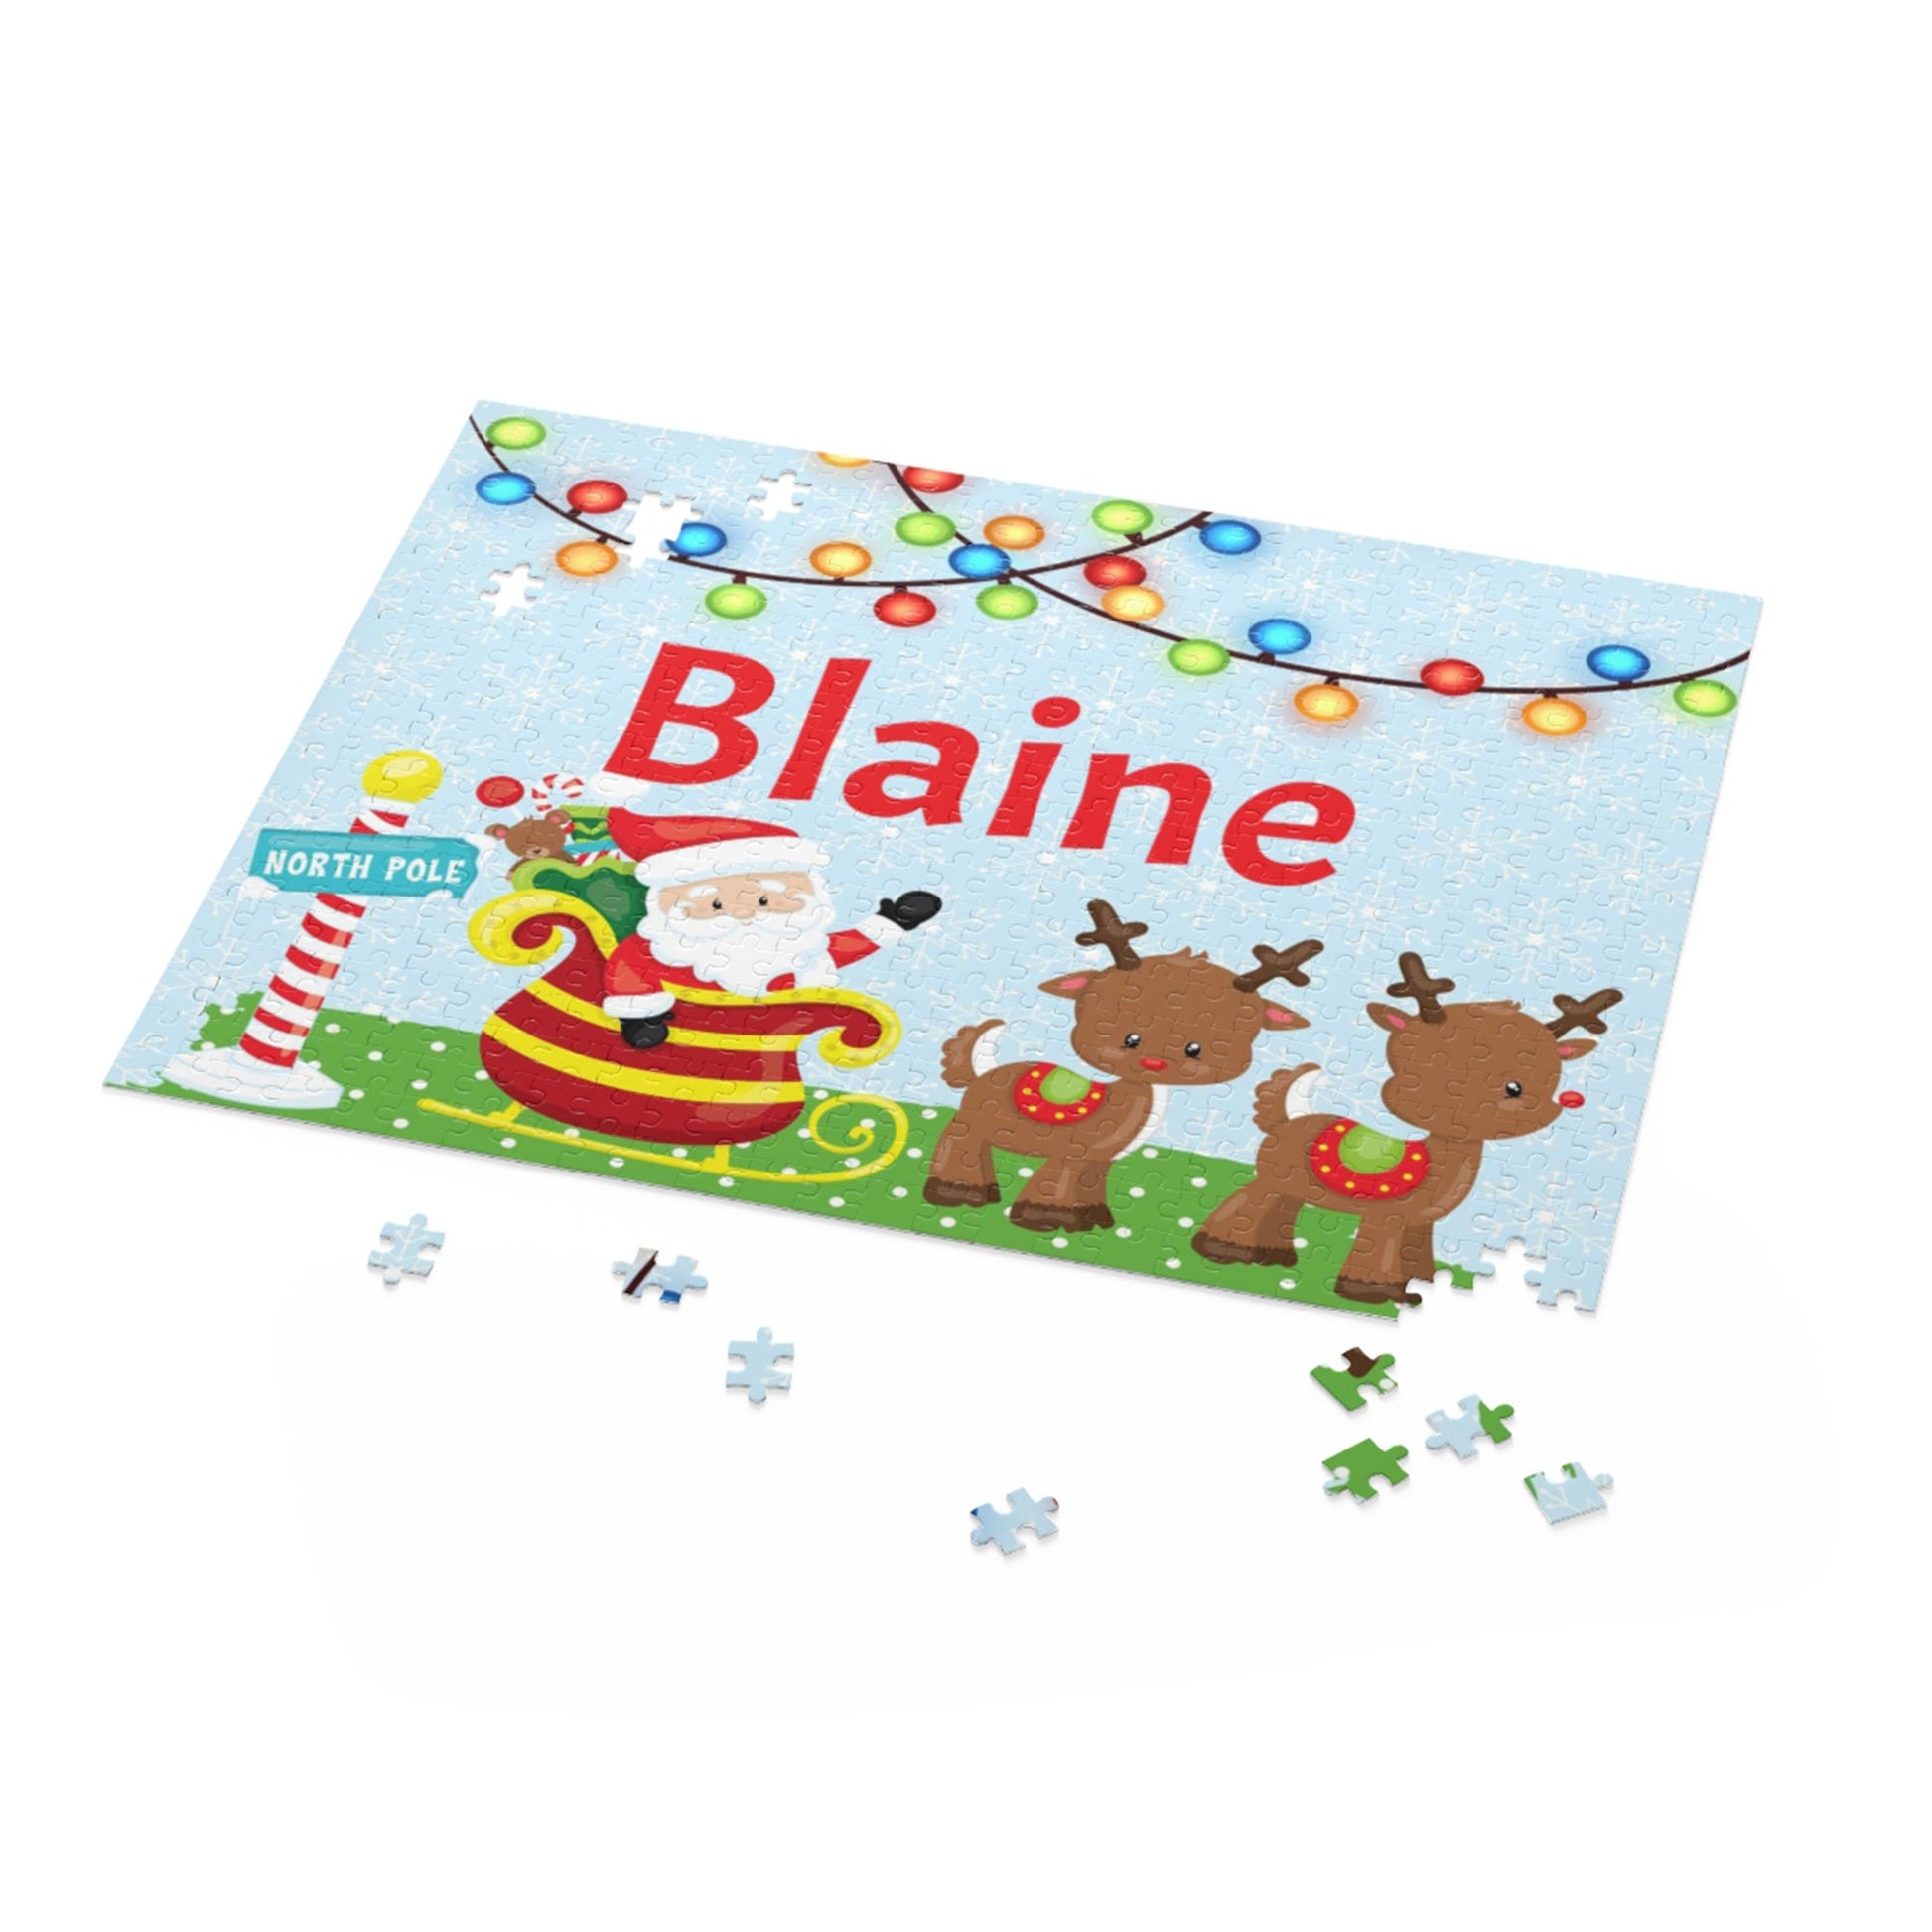 Personalized Gift for Kids, Personalized Christmas Puzzle, Santa's Sleigh Puzzle, Holiday Gift for Kids, Stocking Stuffers, Kid Gift